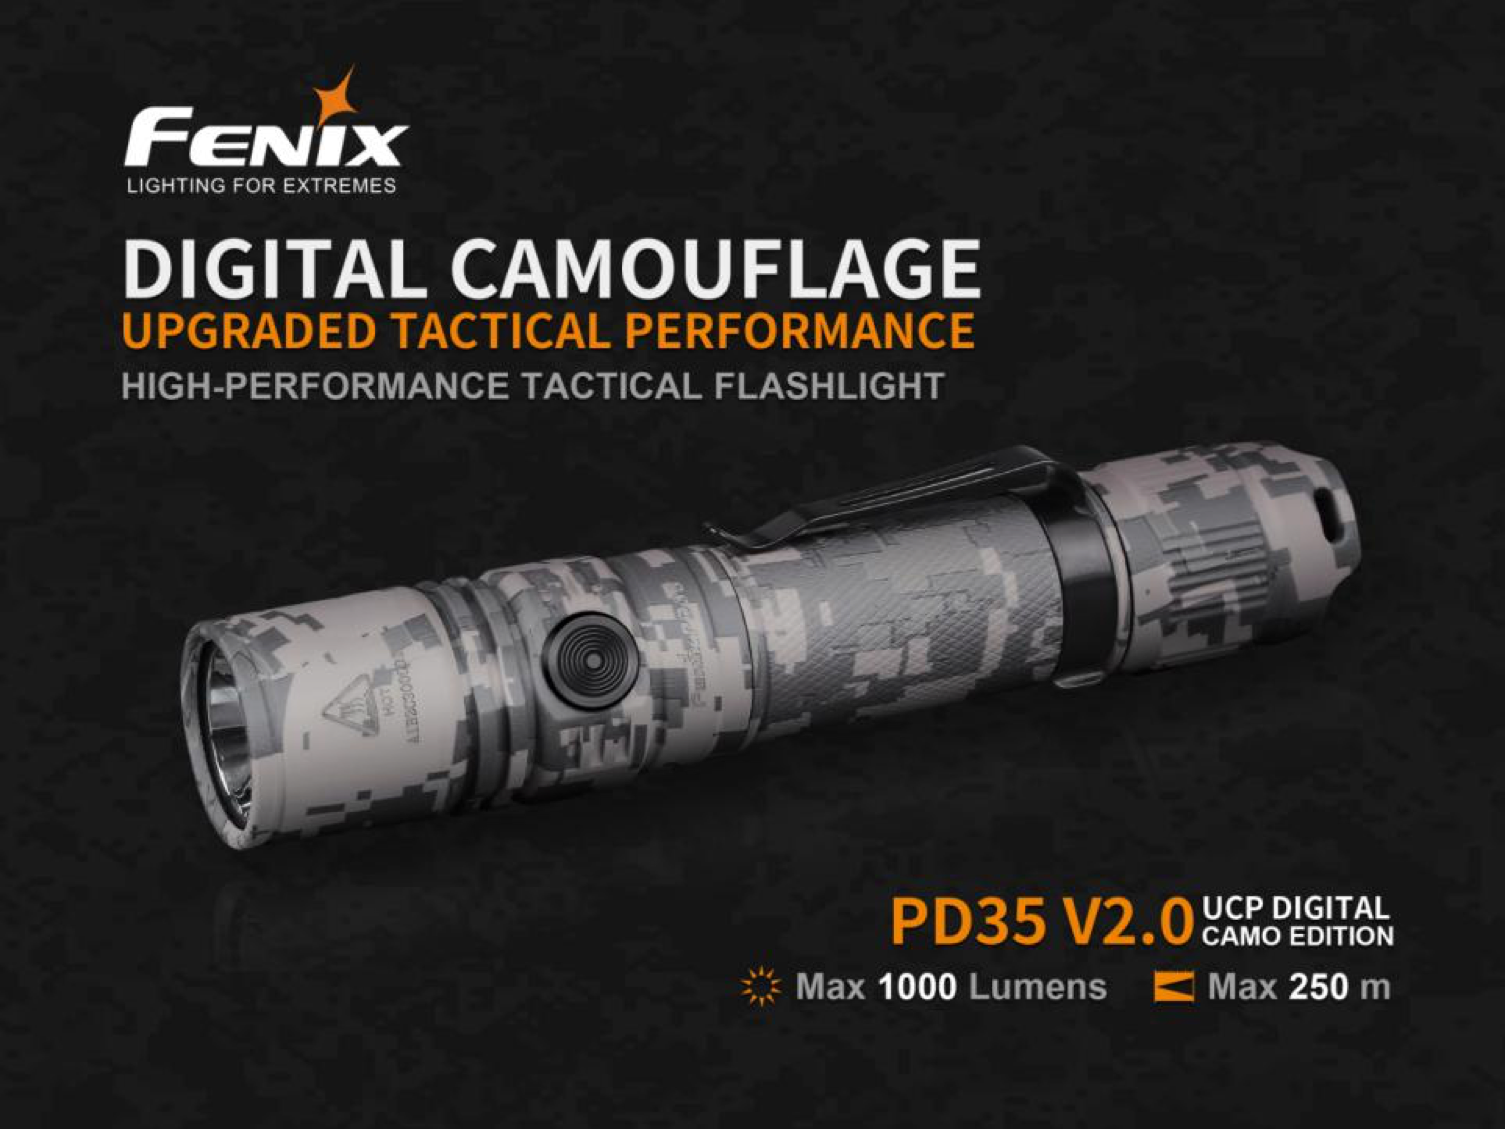 Fenix PD35, Fenix PD35 V2.0 Camo Edition, 1000 Lumens Tactical LED Flashlight, Compact Powerful Torch for Work Outdoor and Law Enforcement Use